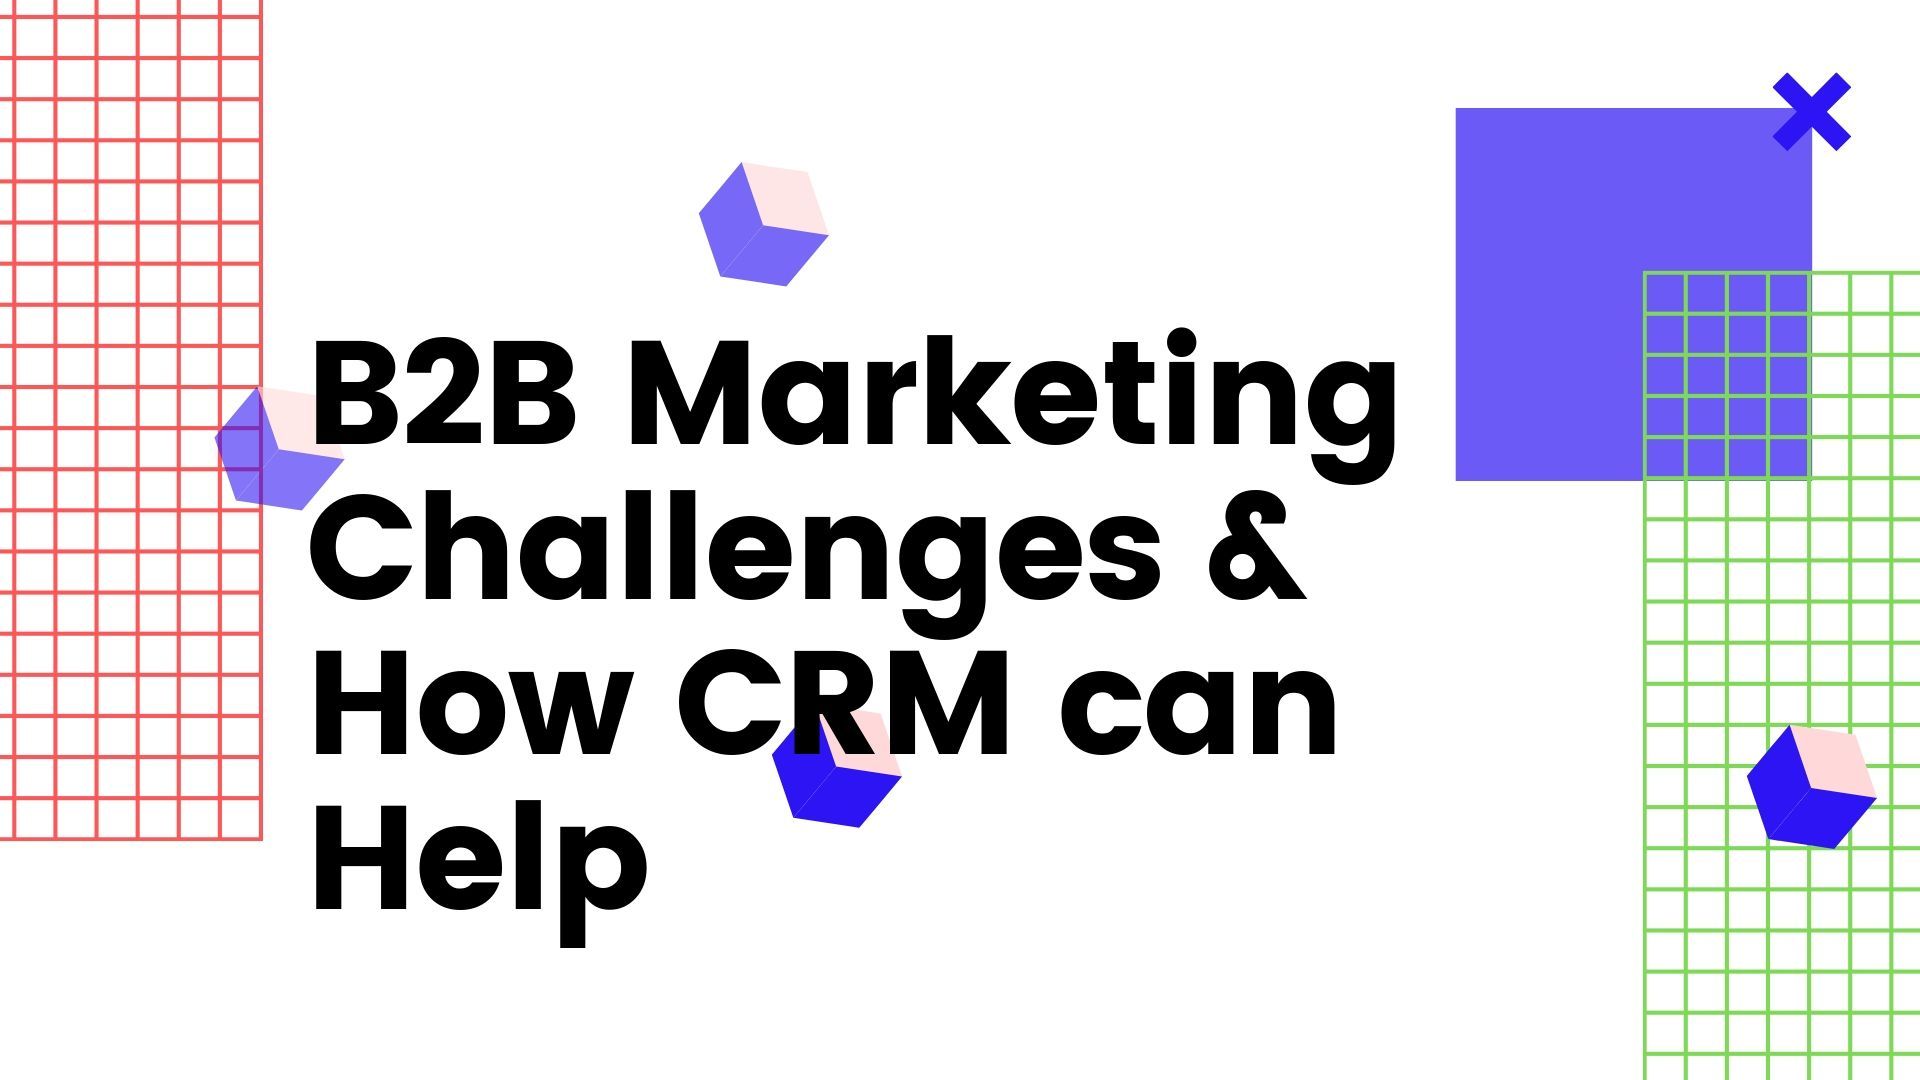 B2B Marketing Challenges & How CRM can Help